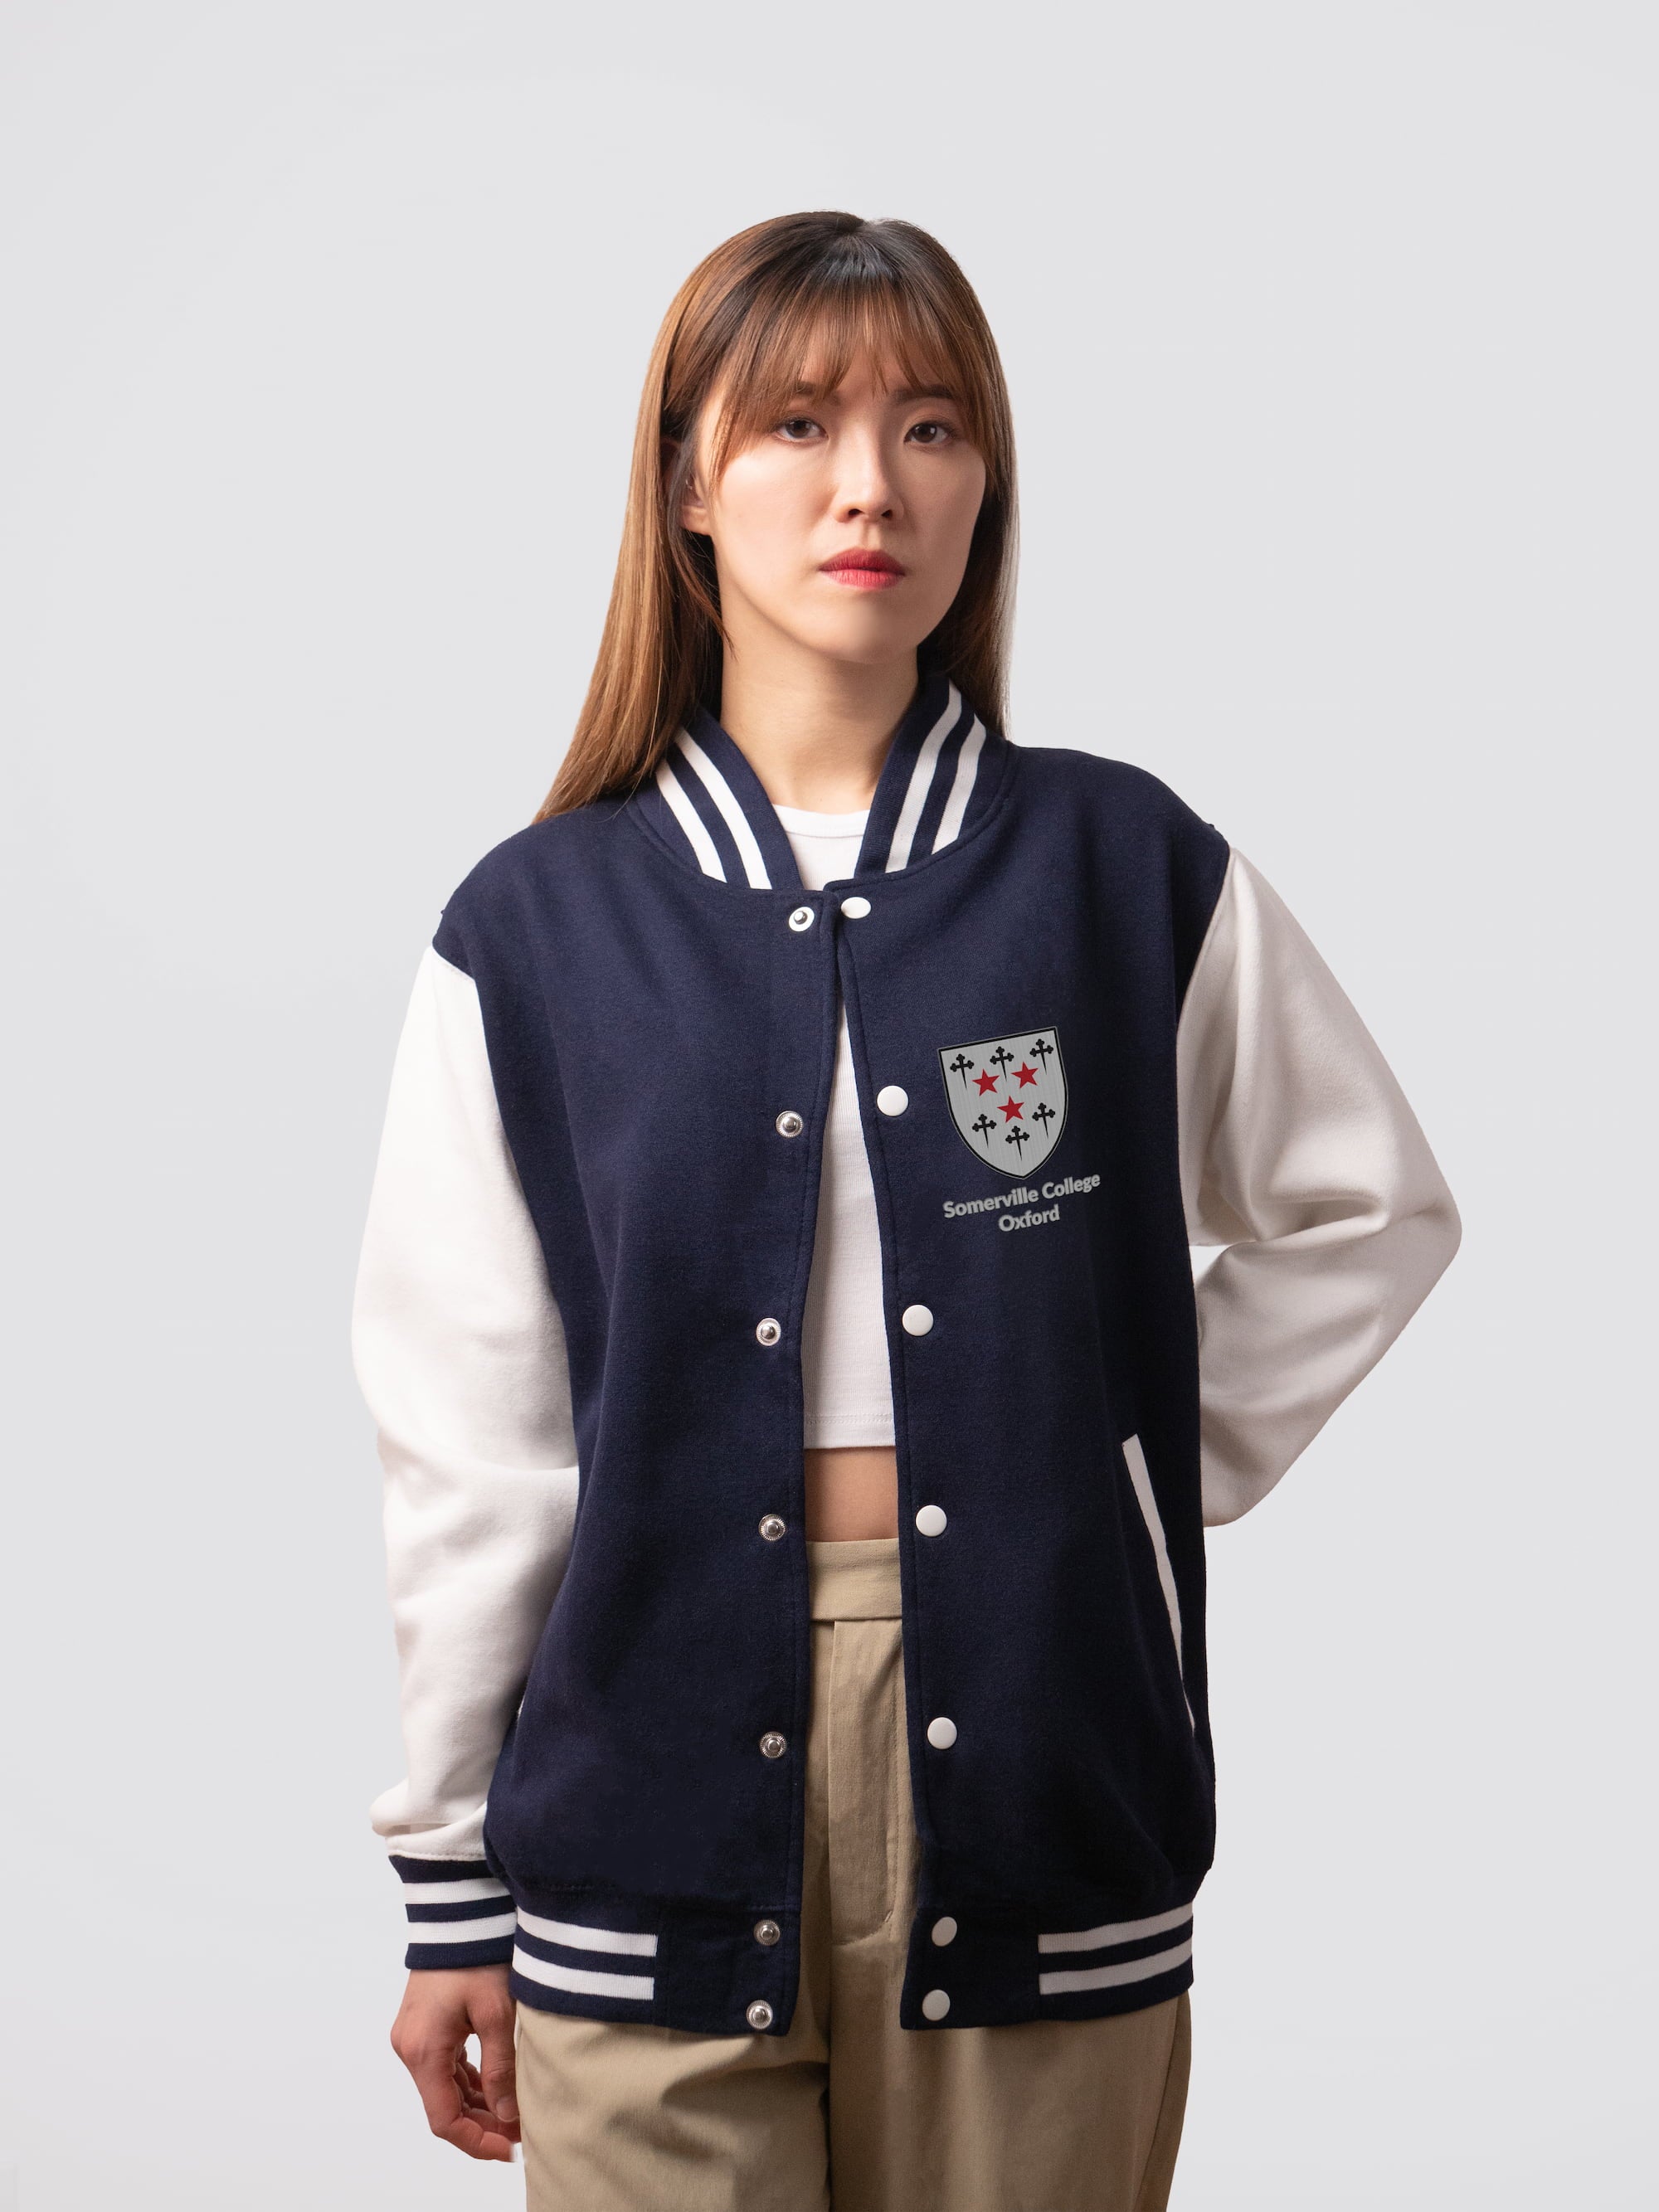 Retro style varsity jacket, with embroidered Somerville College crest